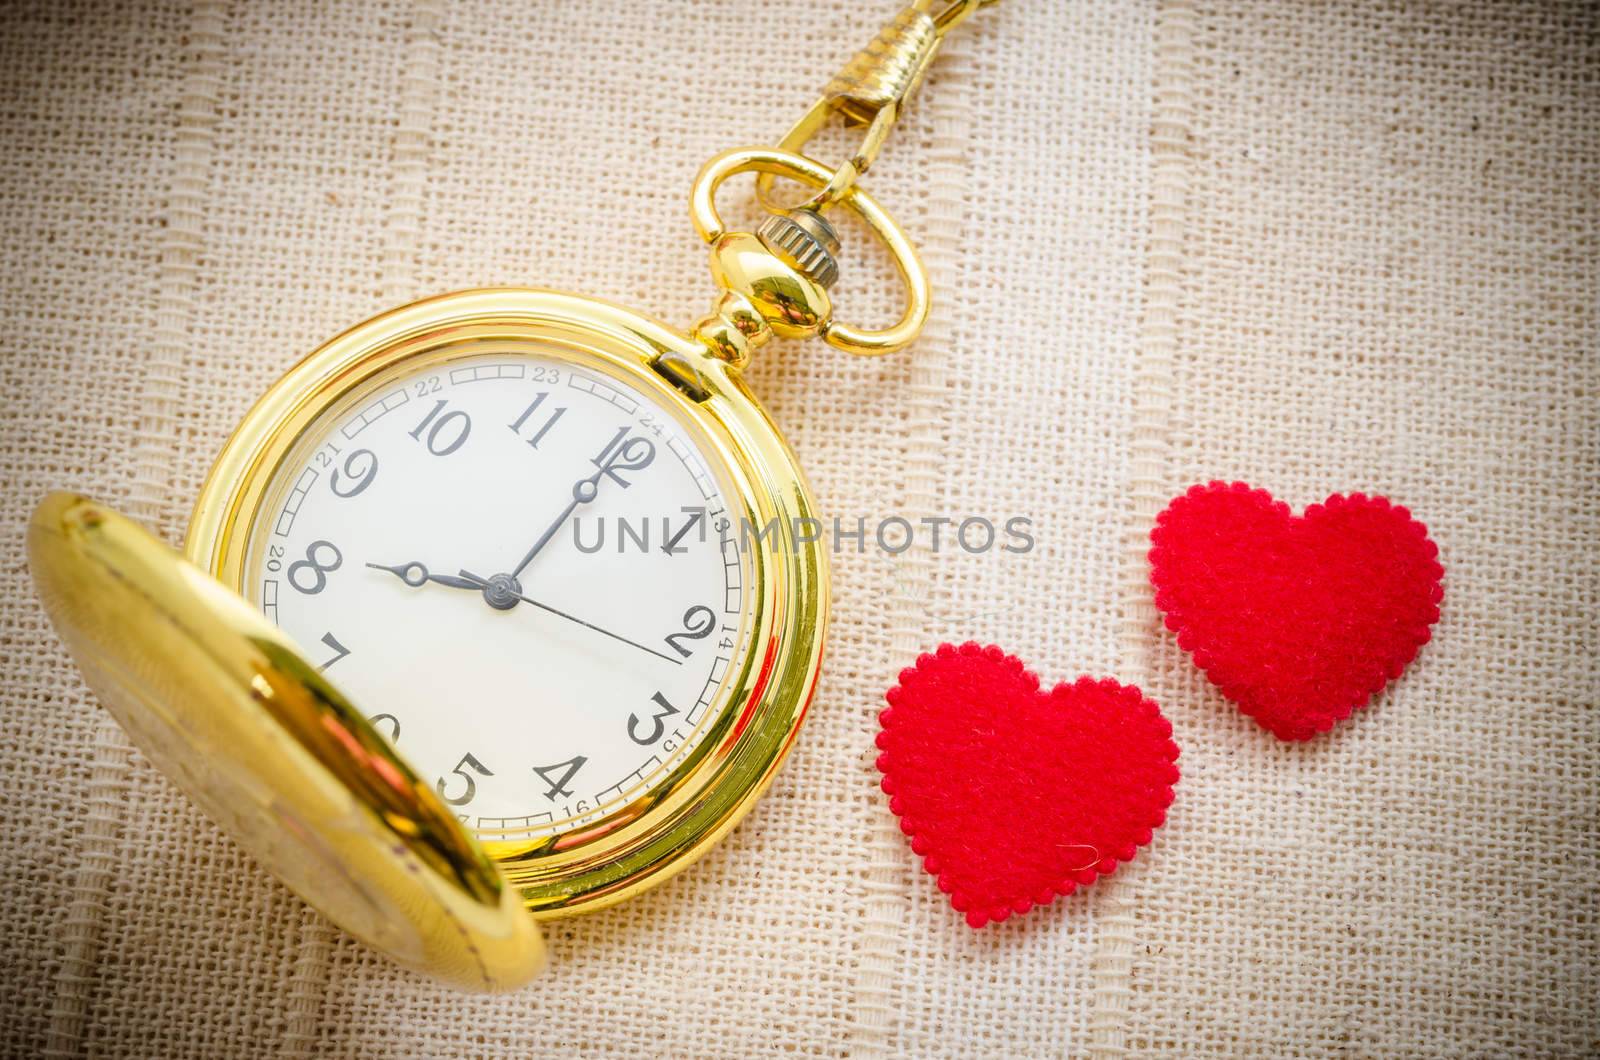 Gold pocket watch and red heart on sack background. Love concept.